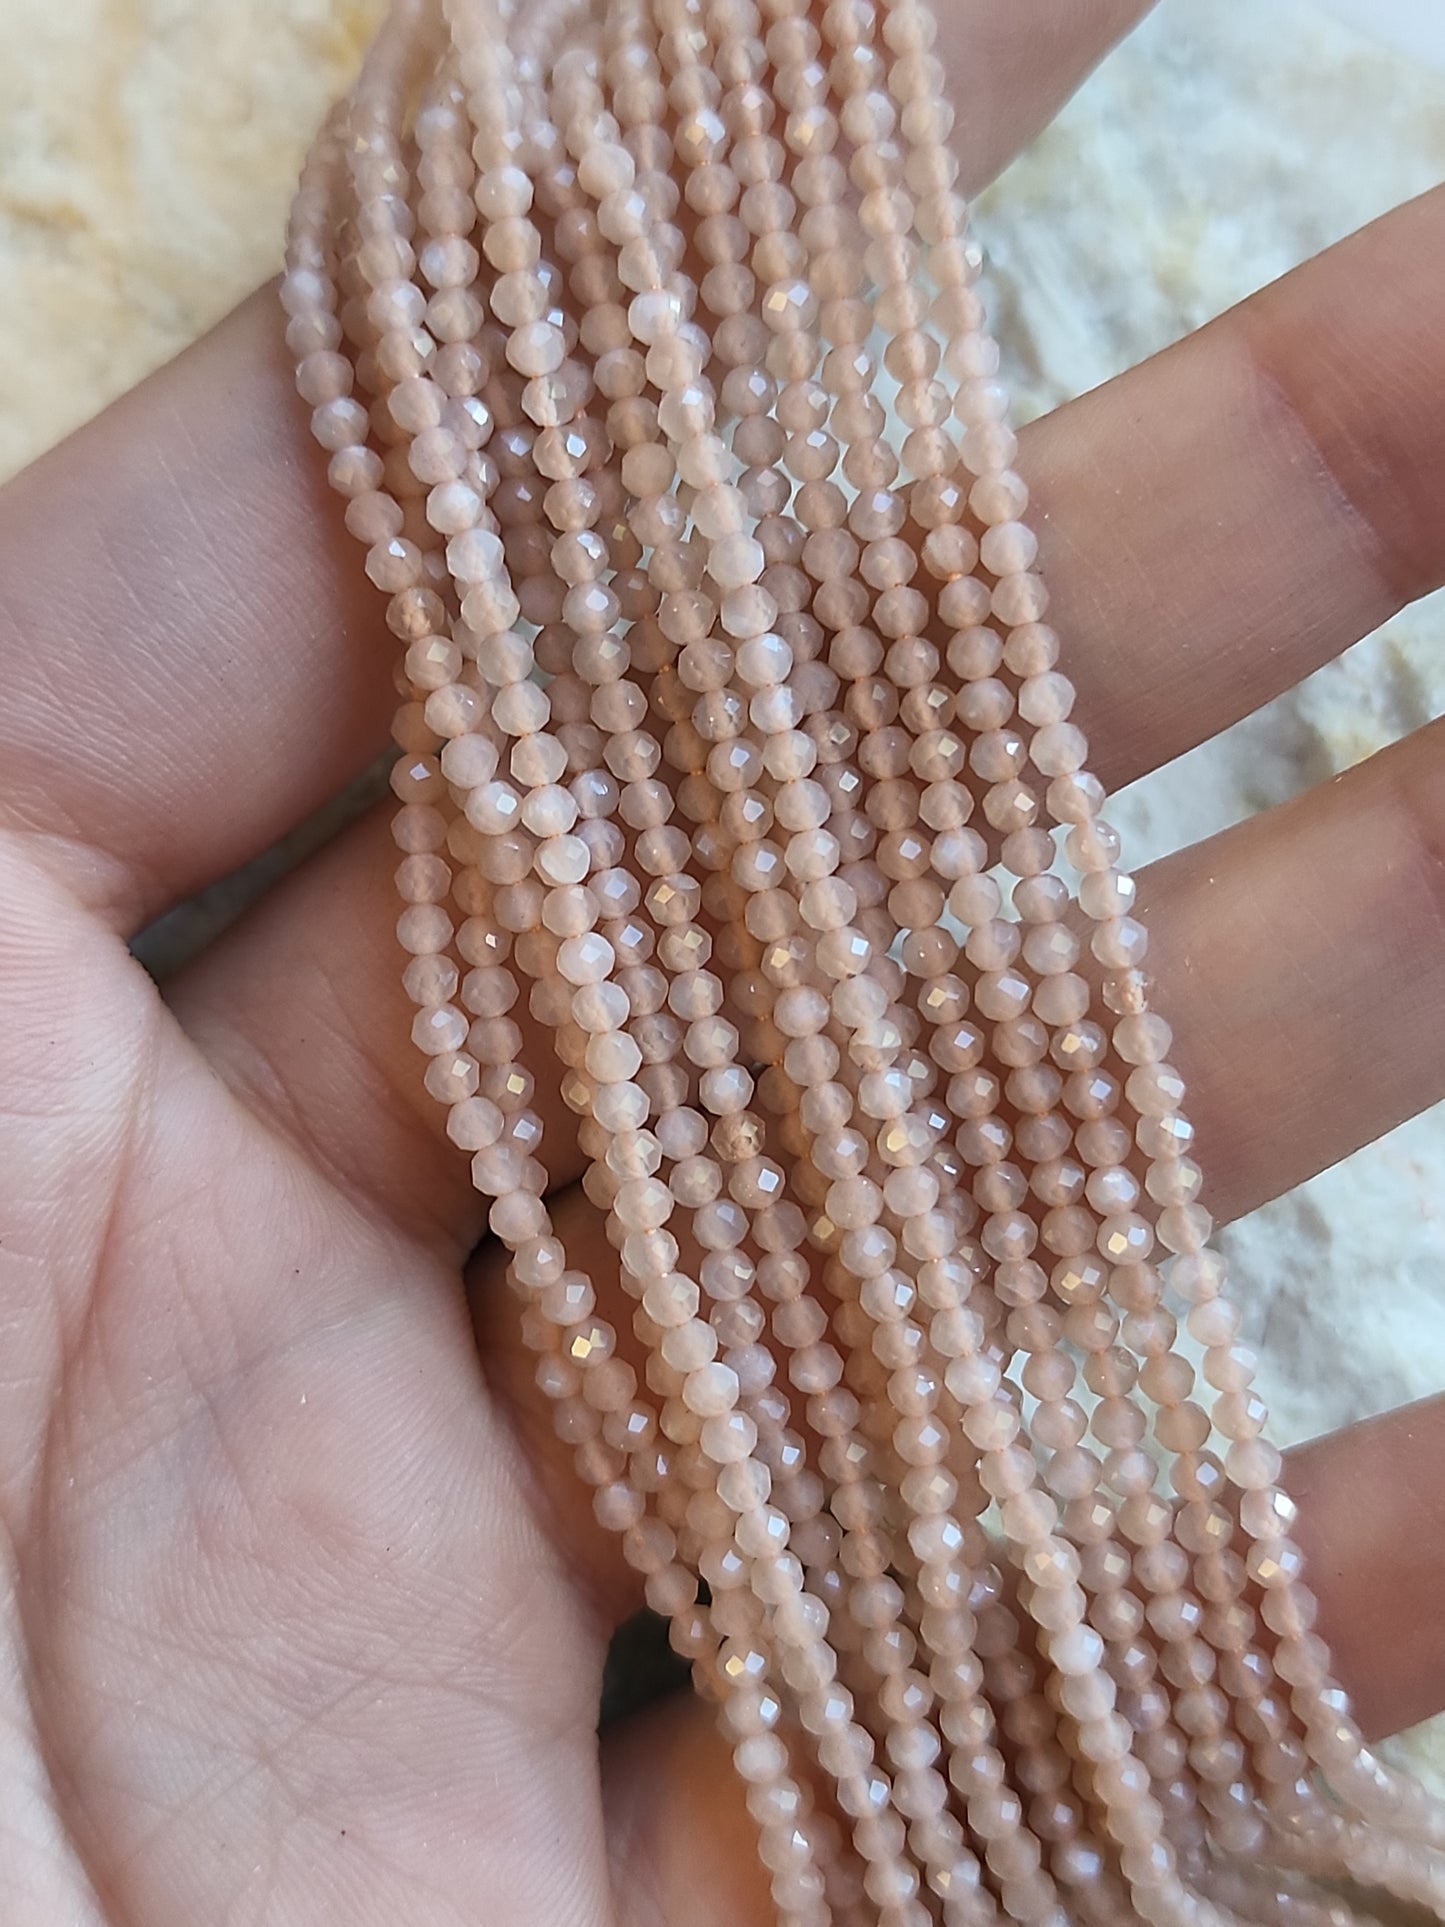 Crafting supplies such as faceted sunstone beads available at wholesale and retail prices, only at our crystal shop in San Diego!